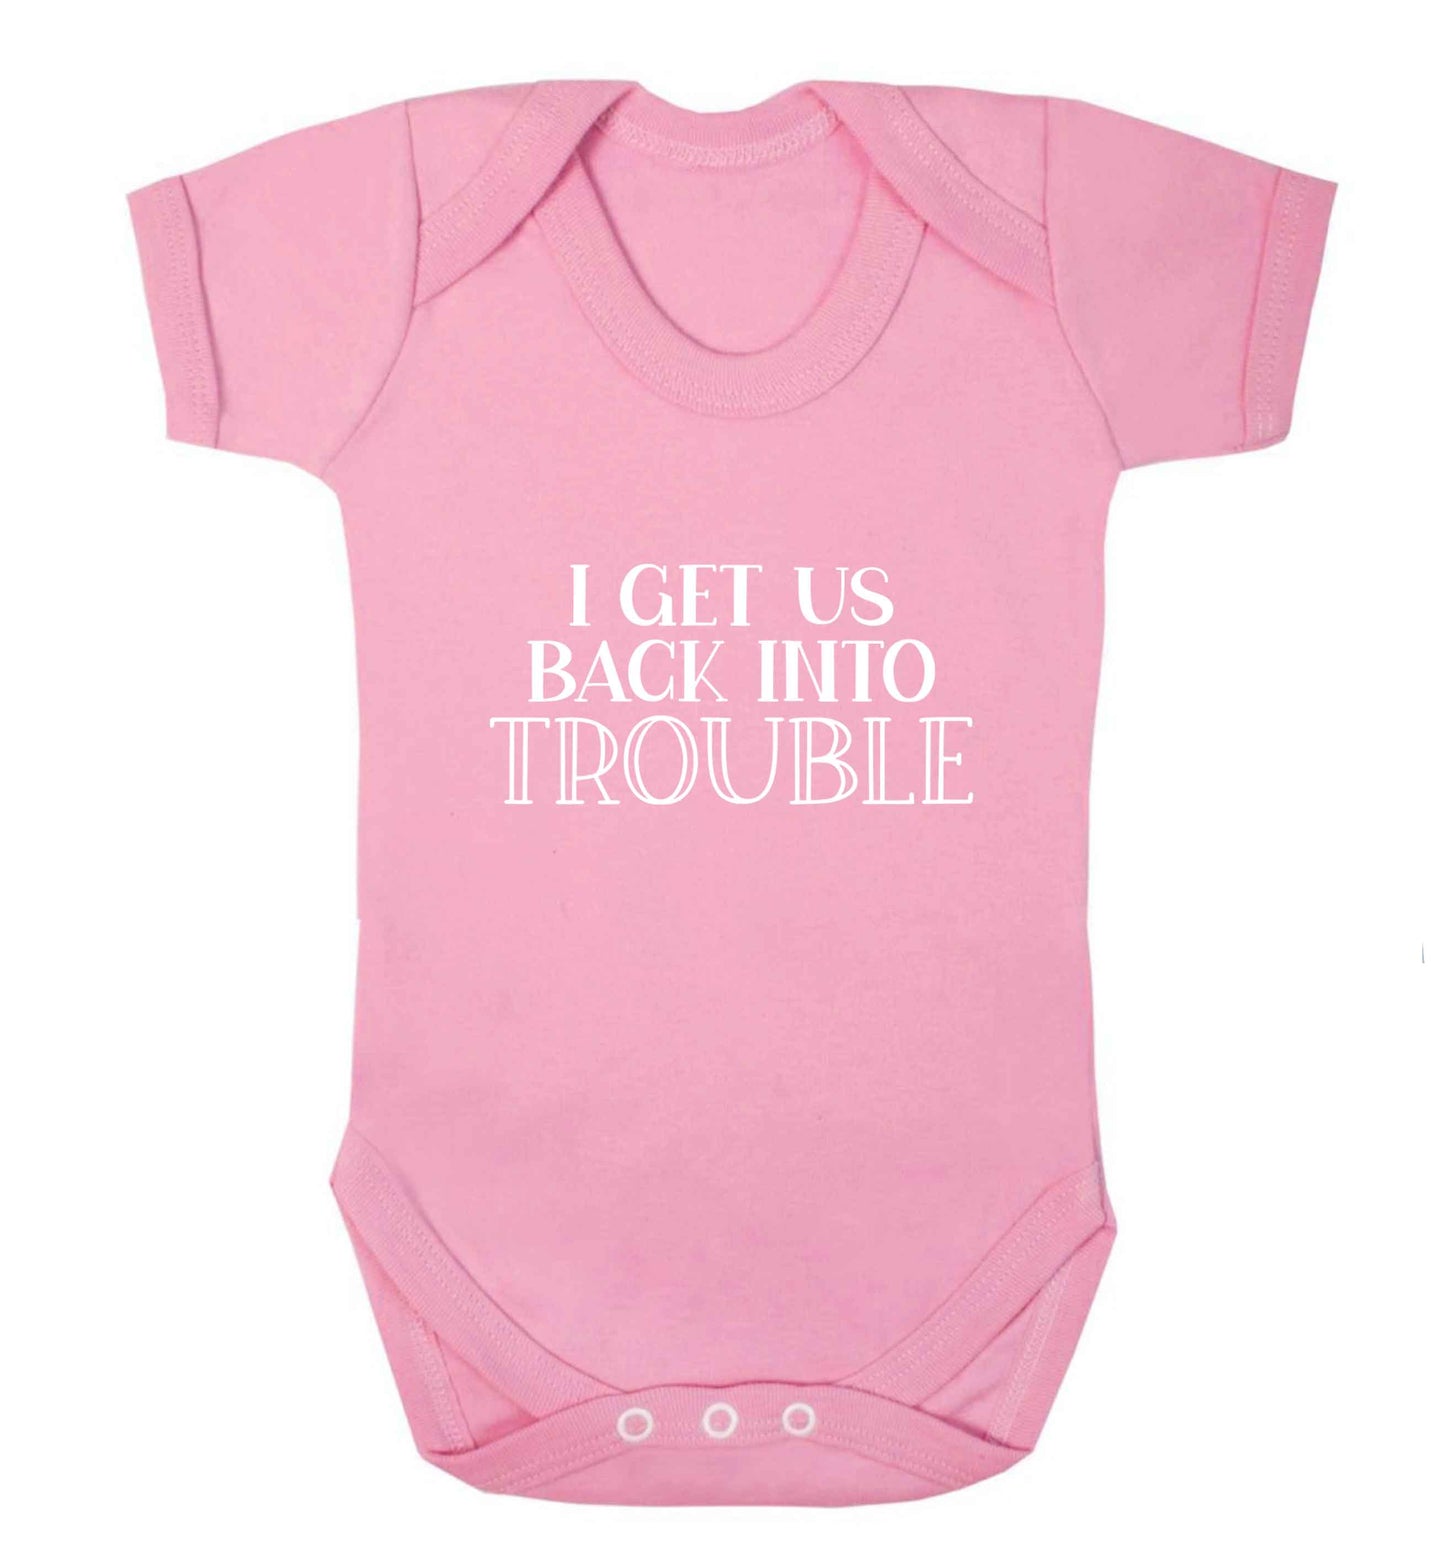 I get us back into trouble baby vest pale pink 18-24 months